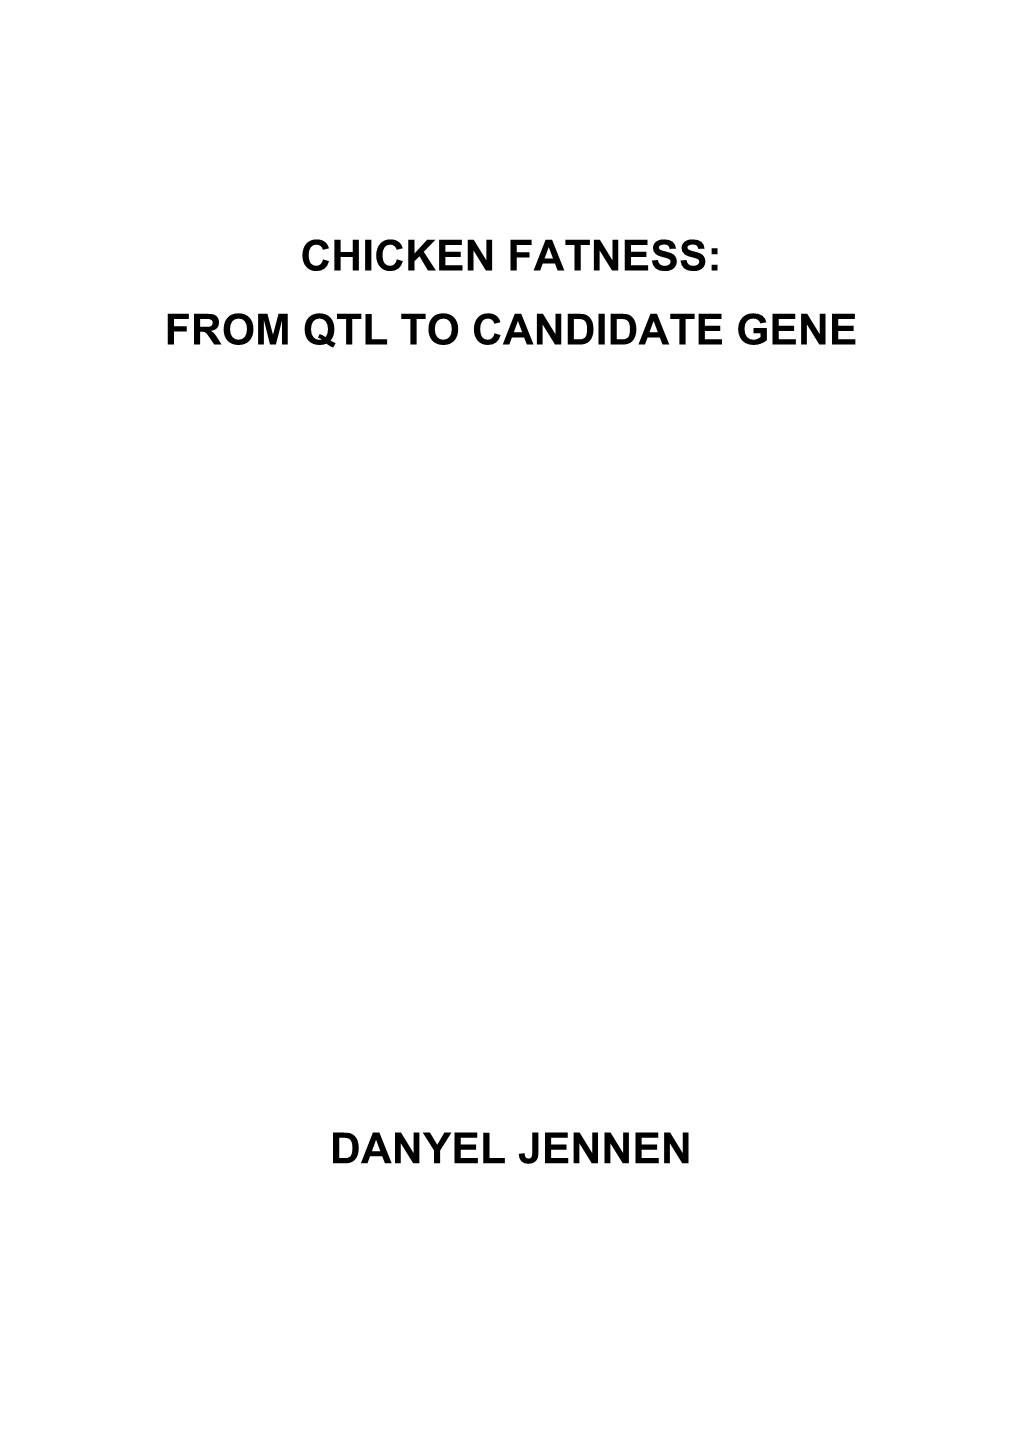 Chicken Fatness: from Qtl to Candidate Gene